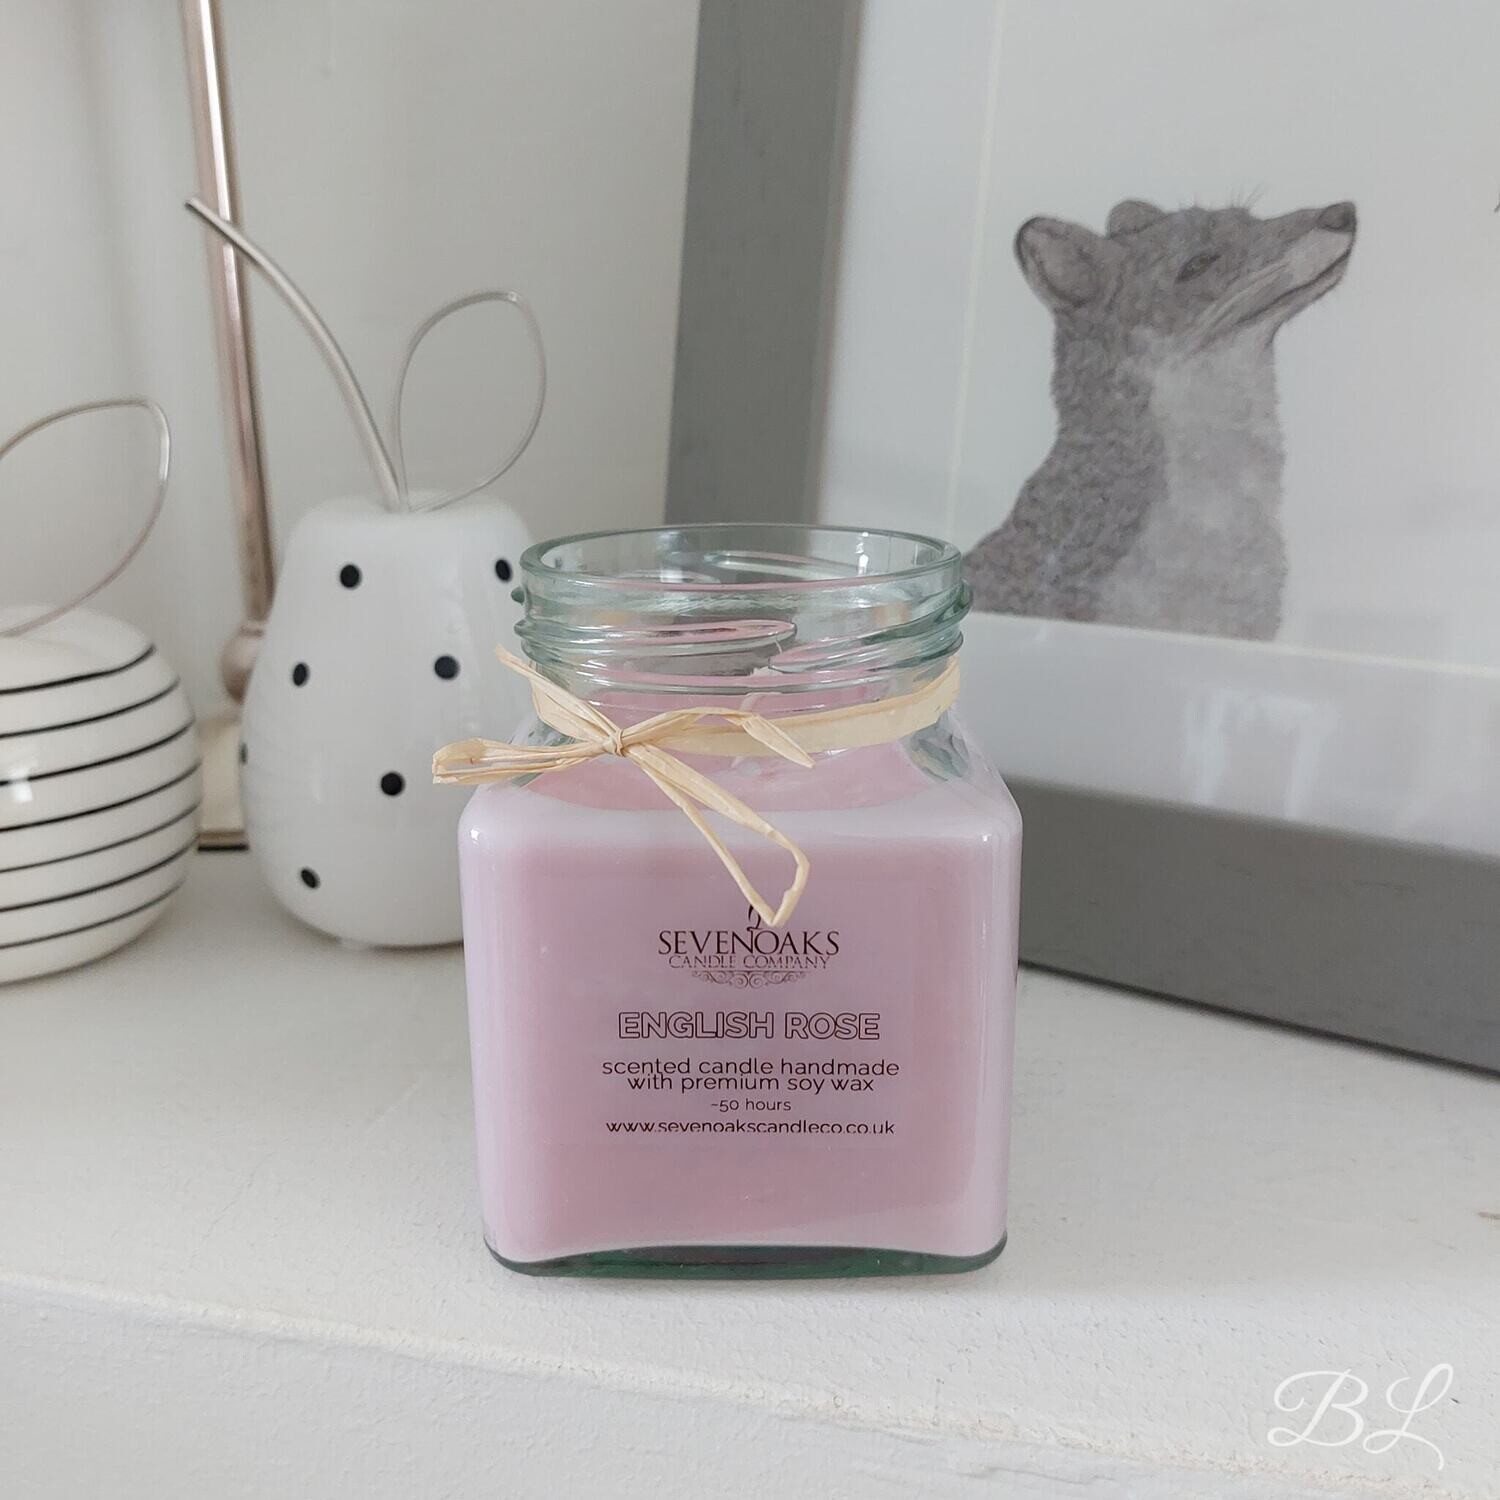 English Rose Scented Handmade Soy Candle Home Fragrance Large